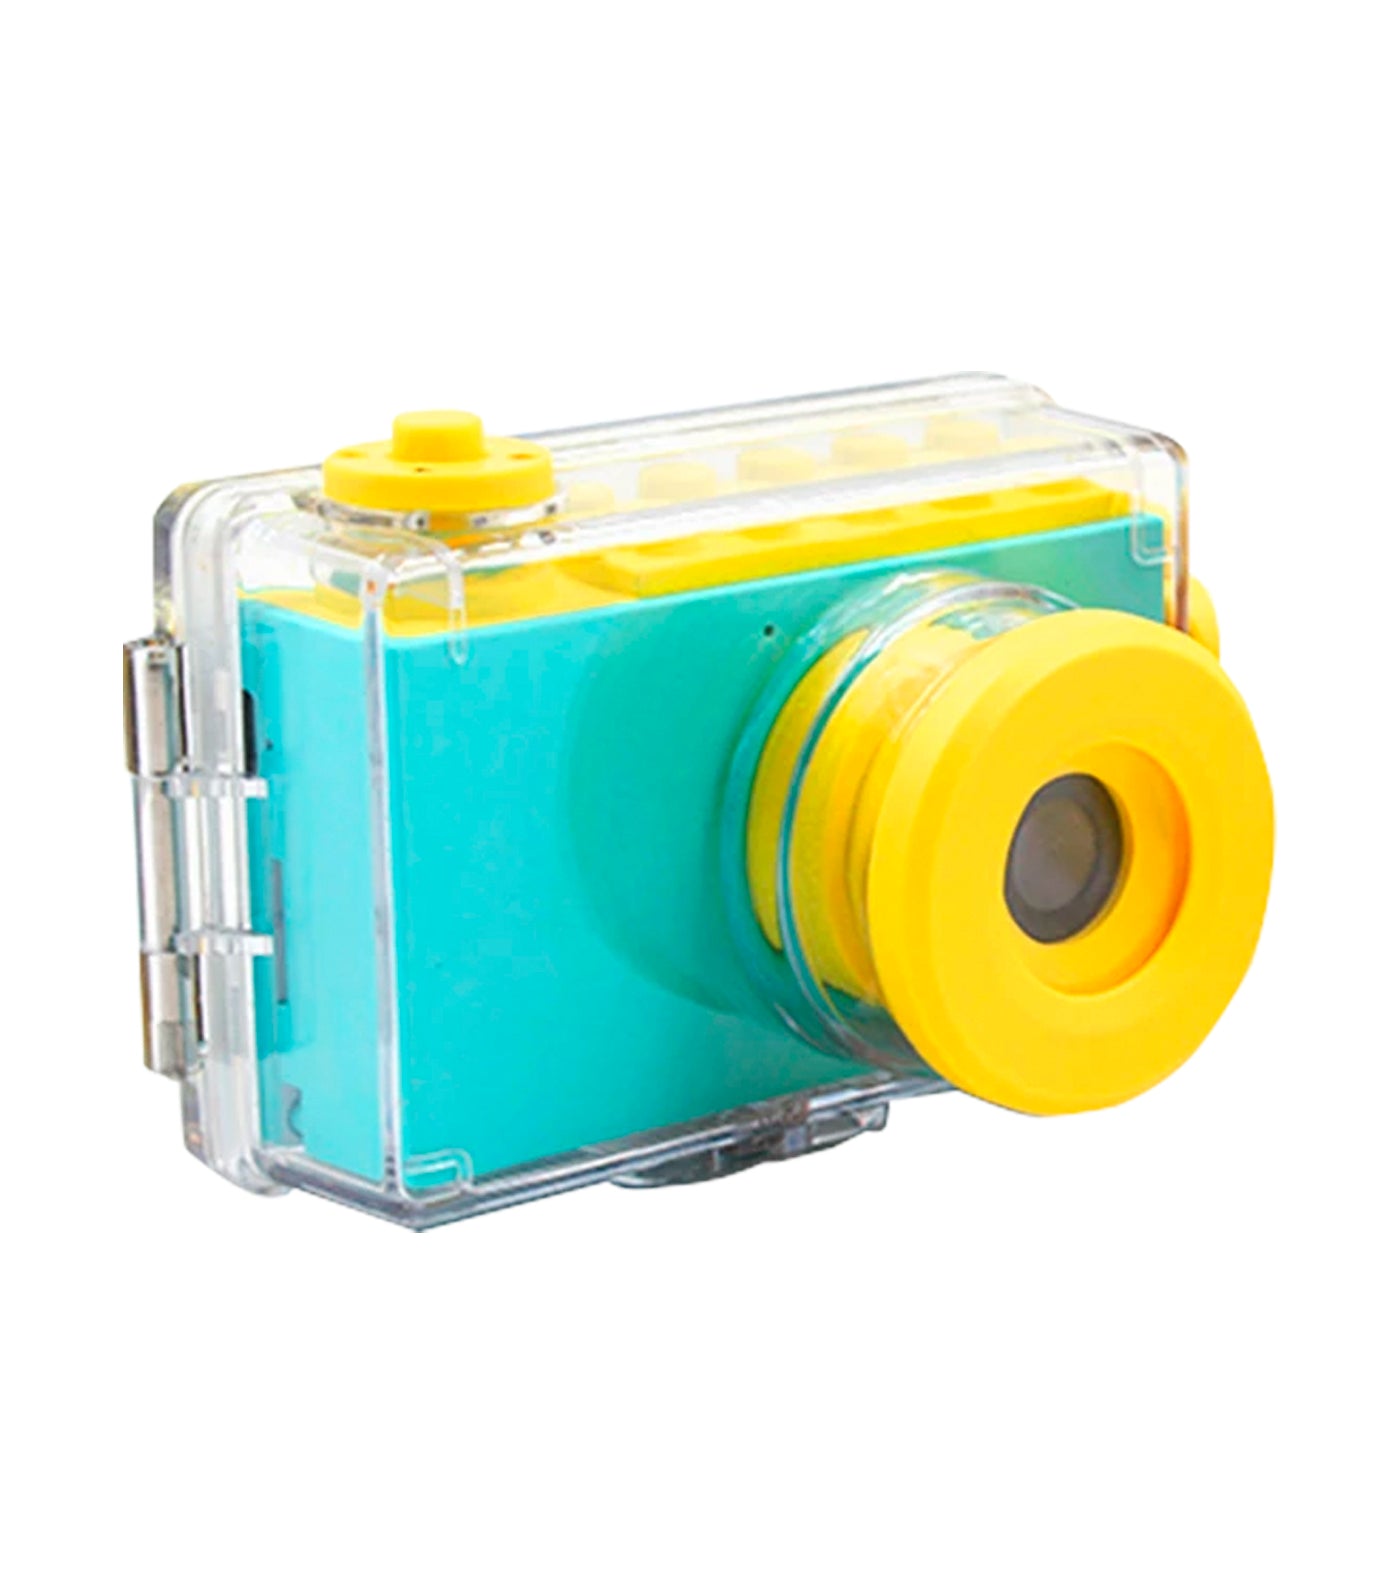 myfirst blue camera 2 8mp camera for kids with waterproof case